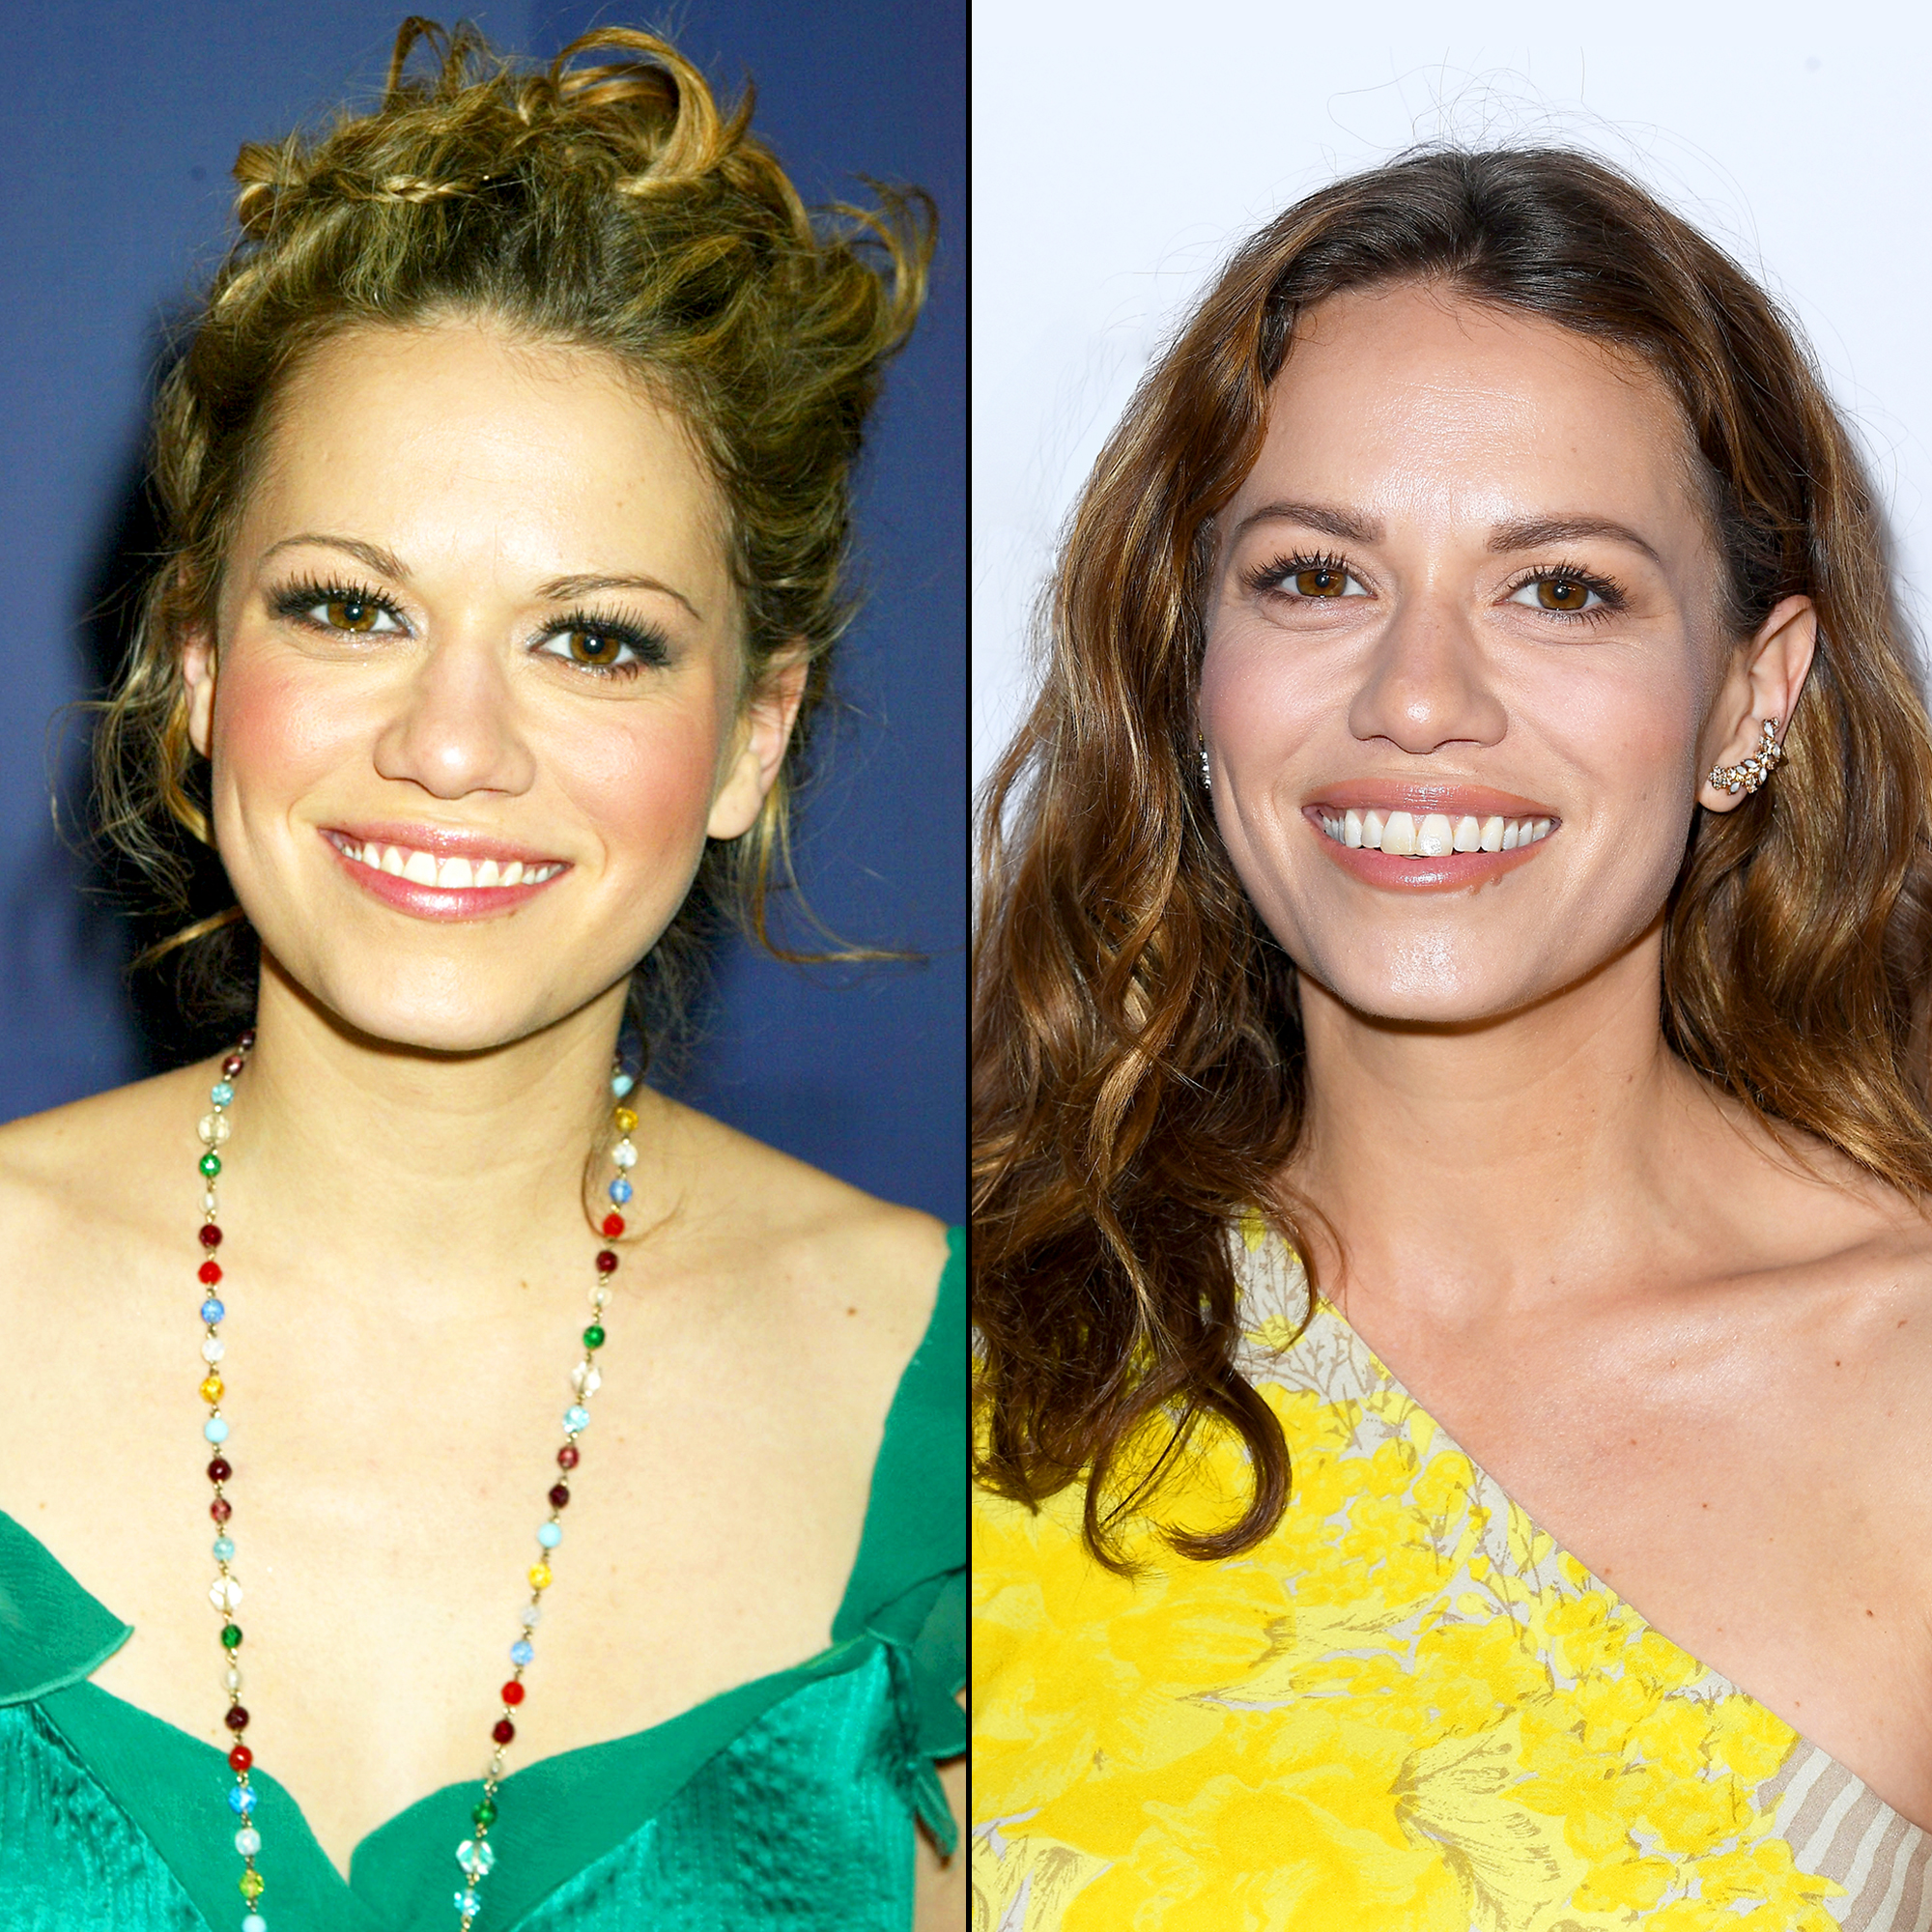 See The 'One Tree Hill' Cast Then And Now